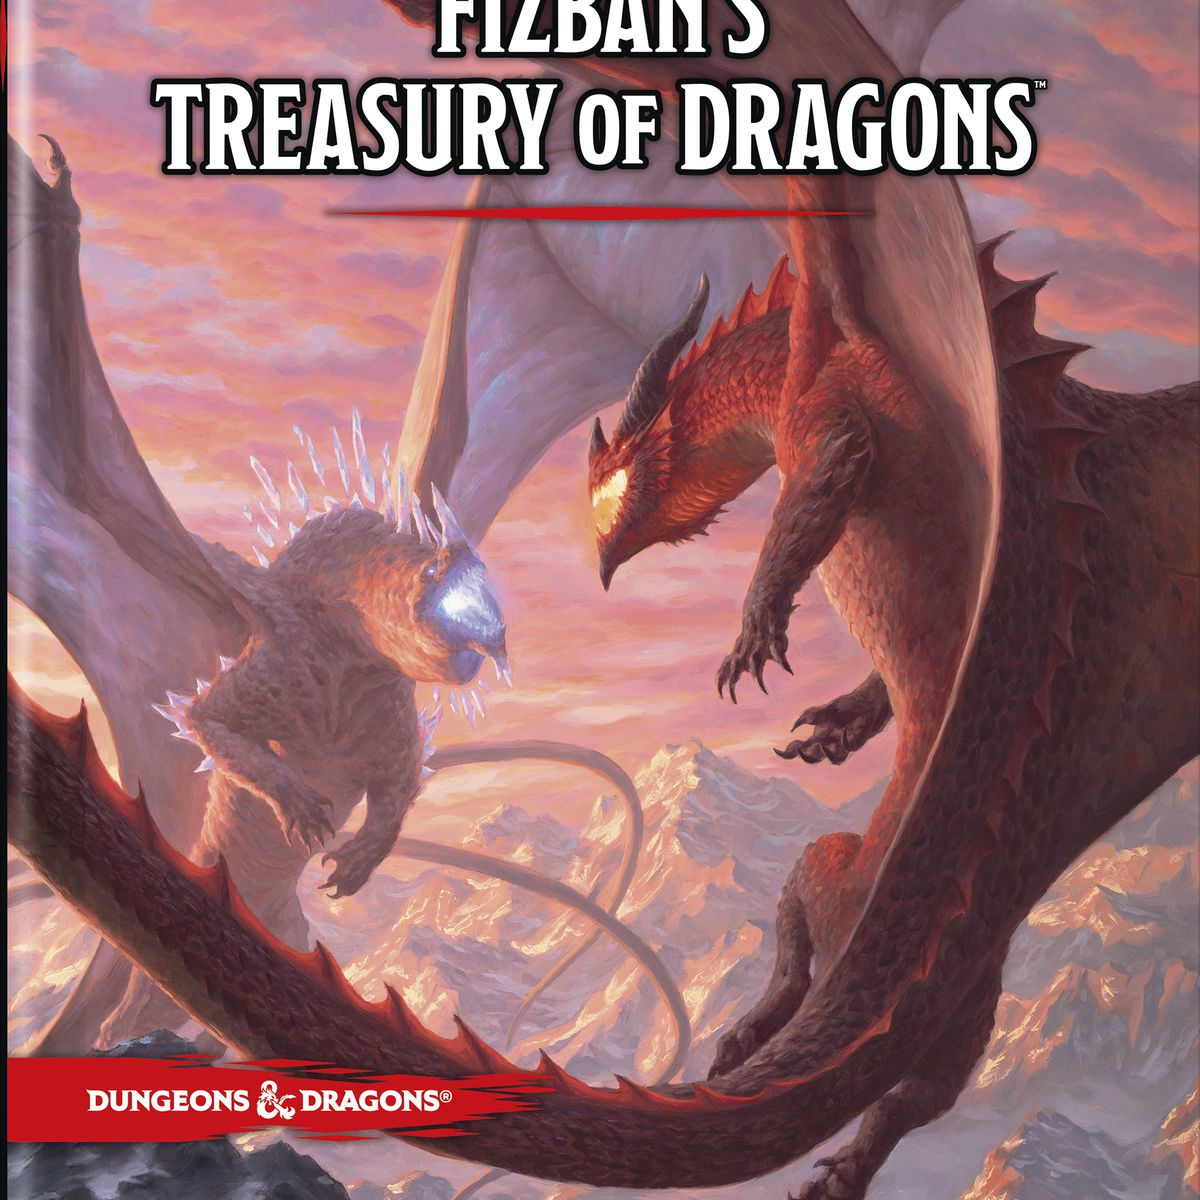 The primary cover of the D&amp;D sourcebook Fizban’s Treasury of Dragons